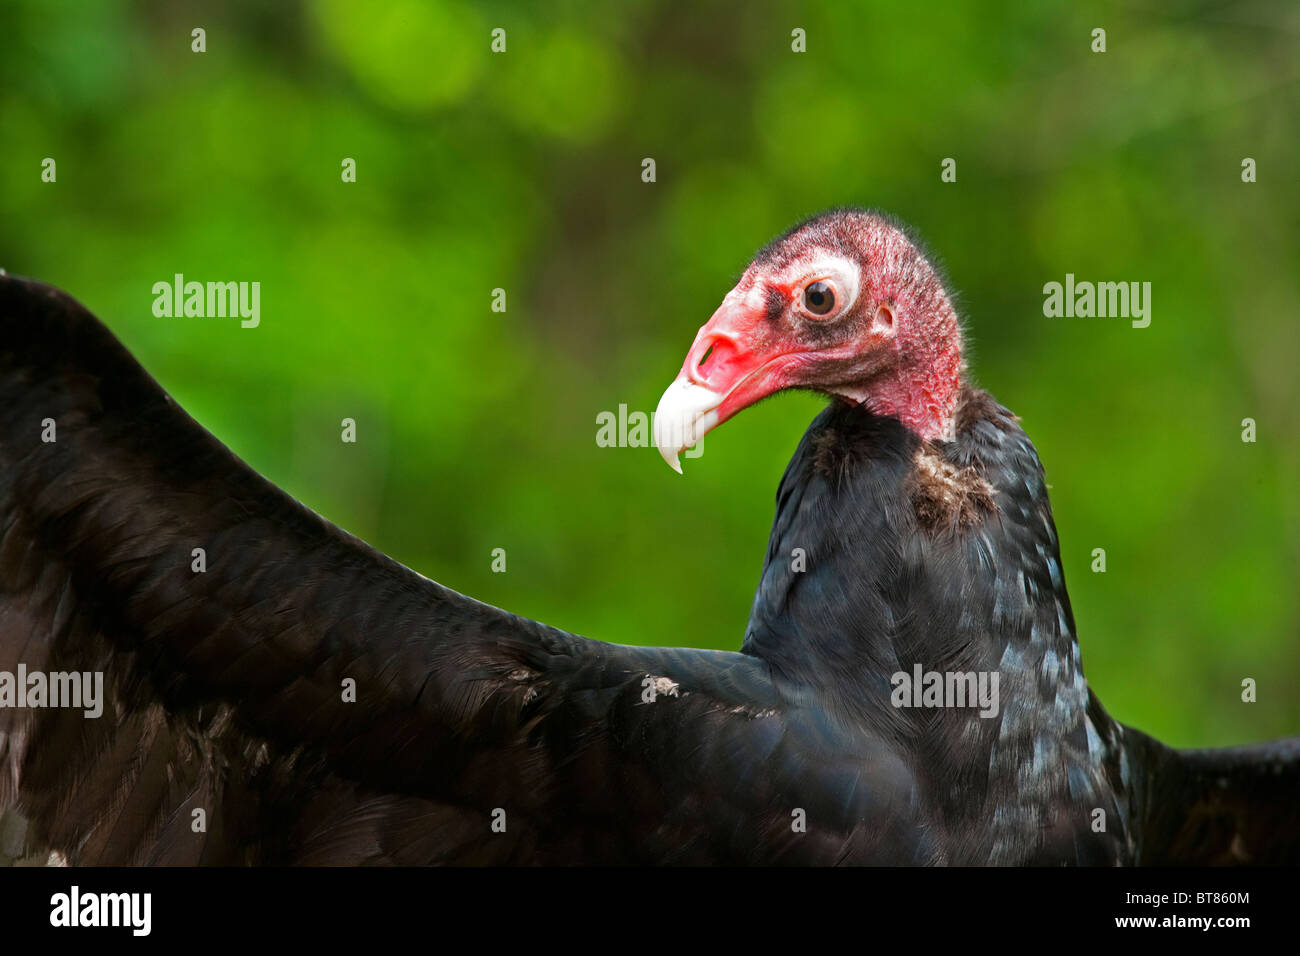 The Turkey Vulture, Cathartes aura, is a bird found throughout most of the Americas. Stock Photo